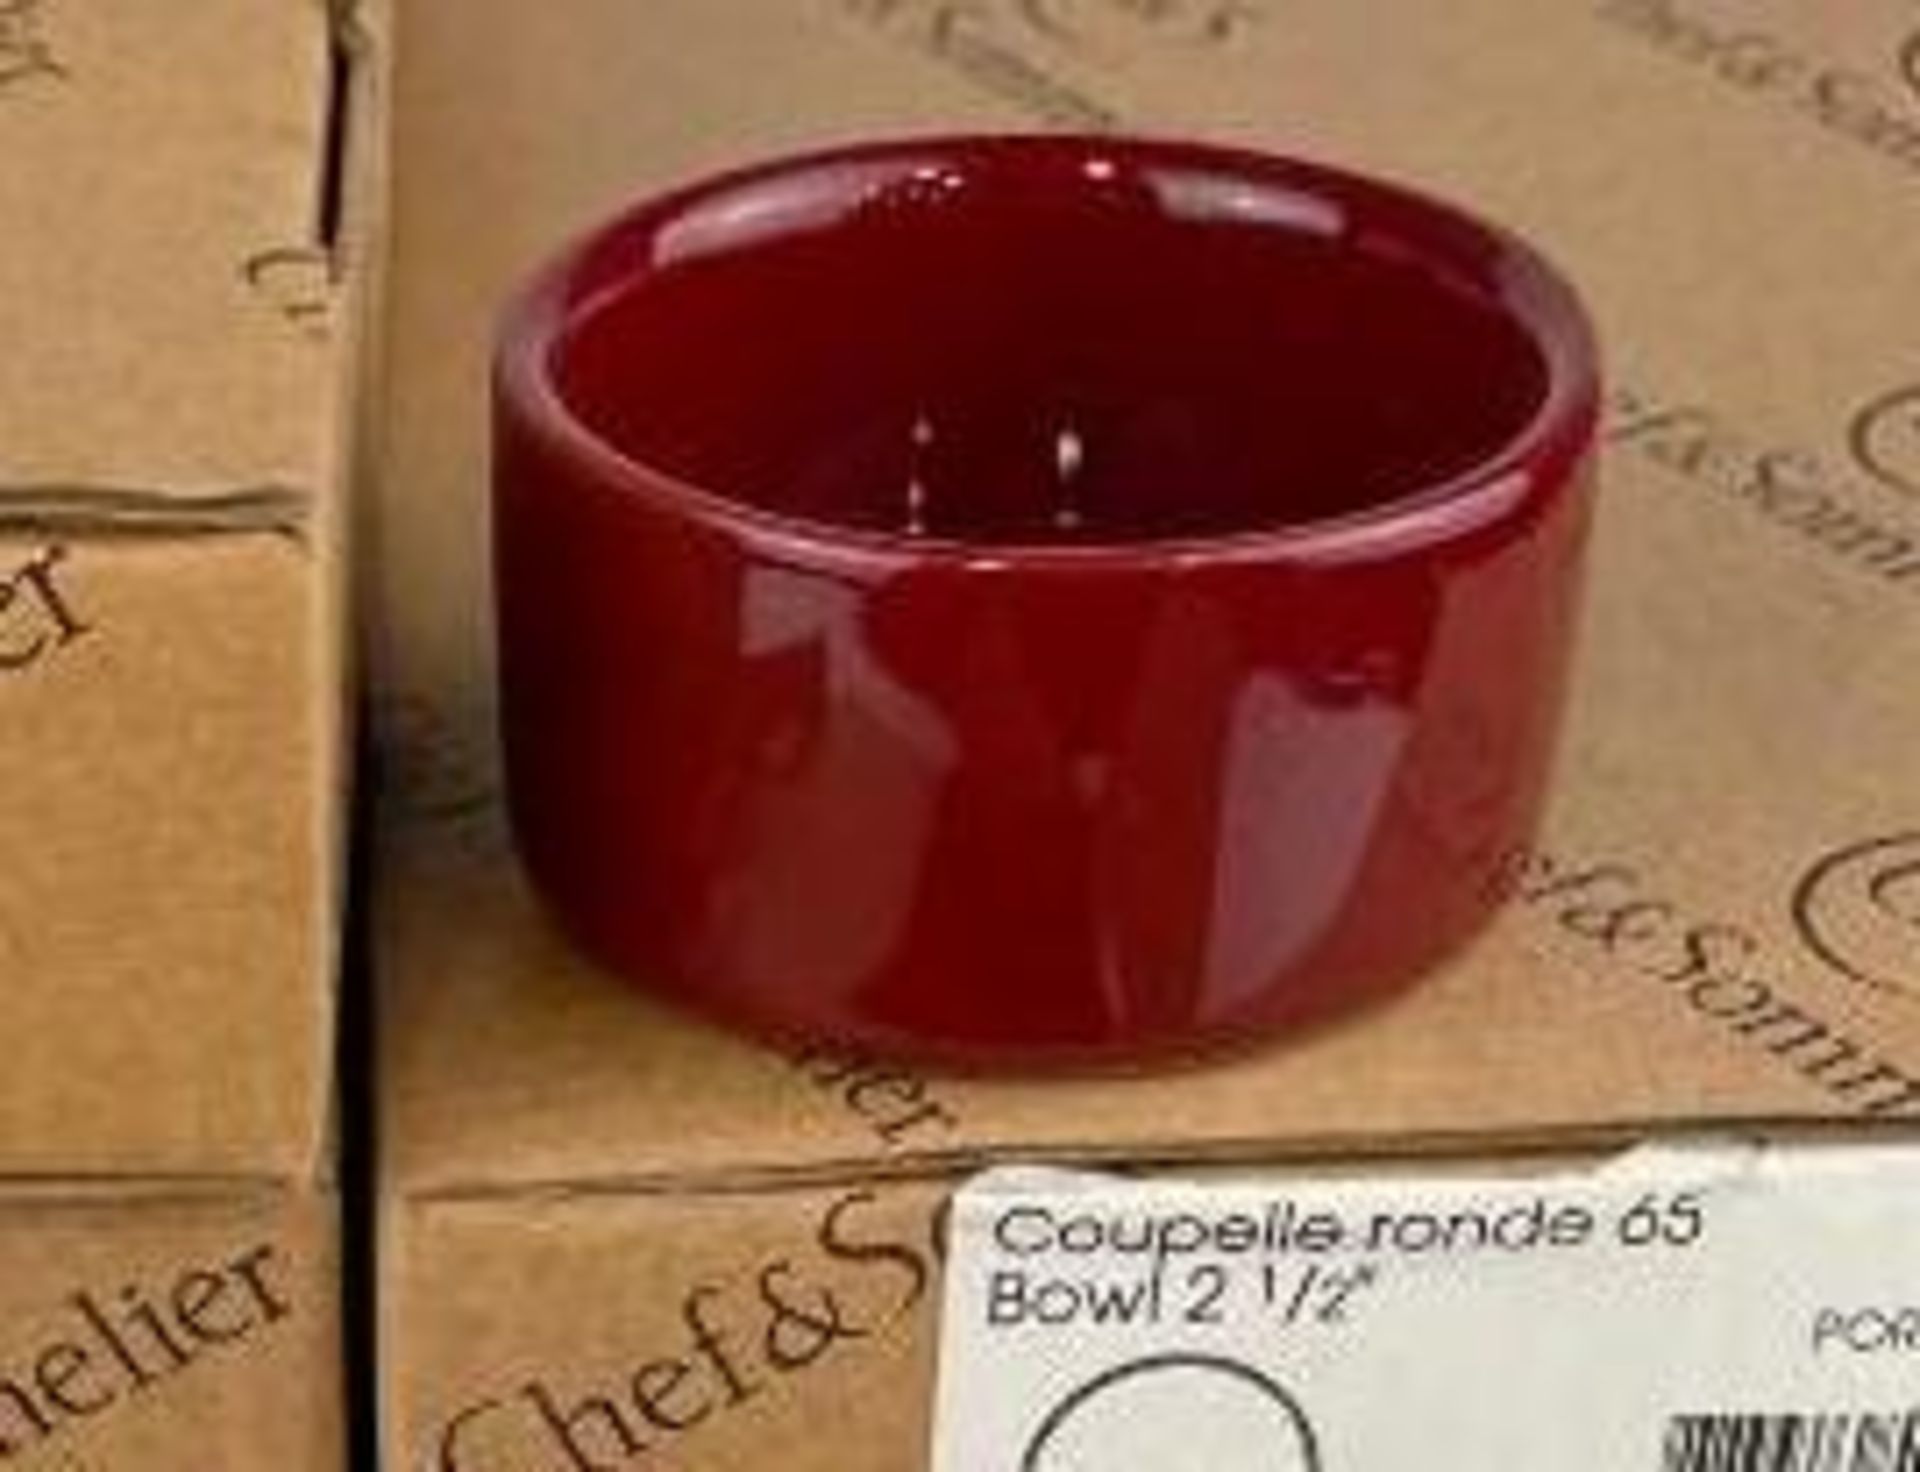 2 CASES OF CHEF & SOMMELIER PURITY 2 OZ. RED CIRCULAR BOWLS, 24/CASE - NEW - Image 2 of 5